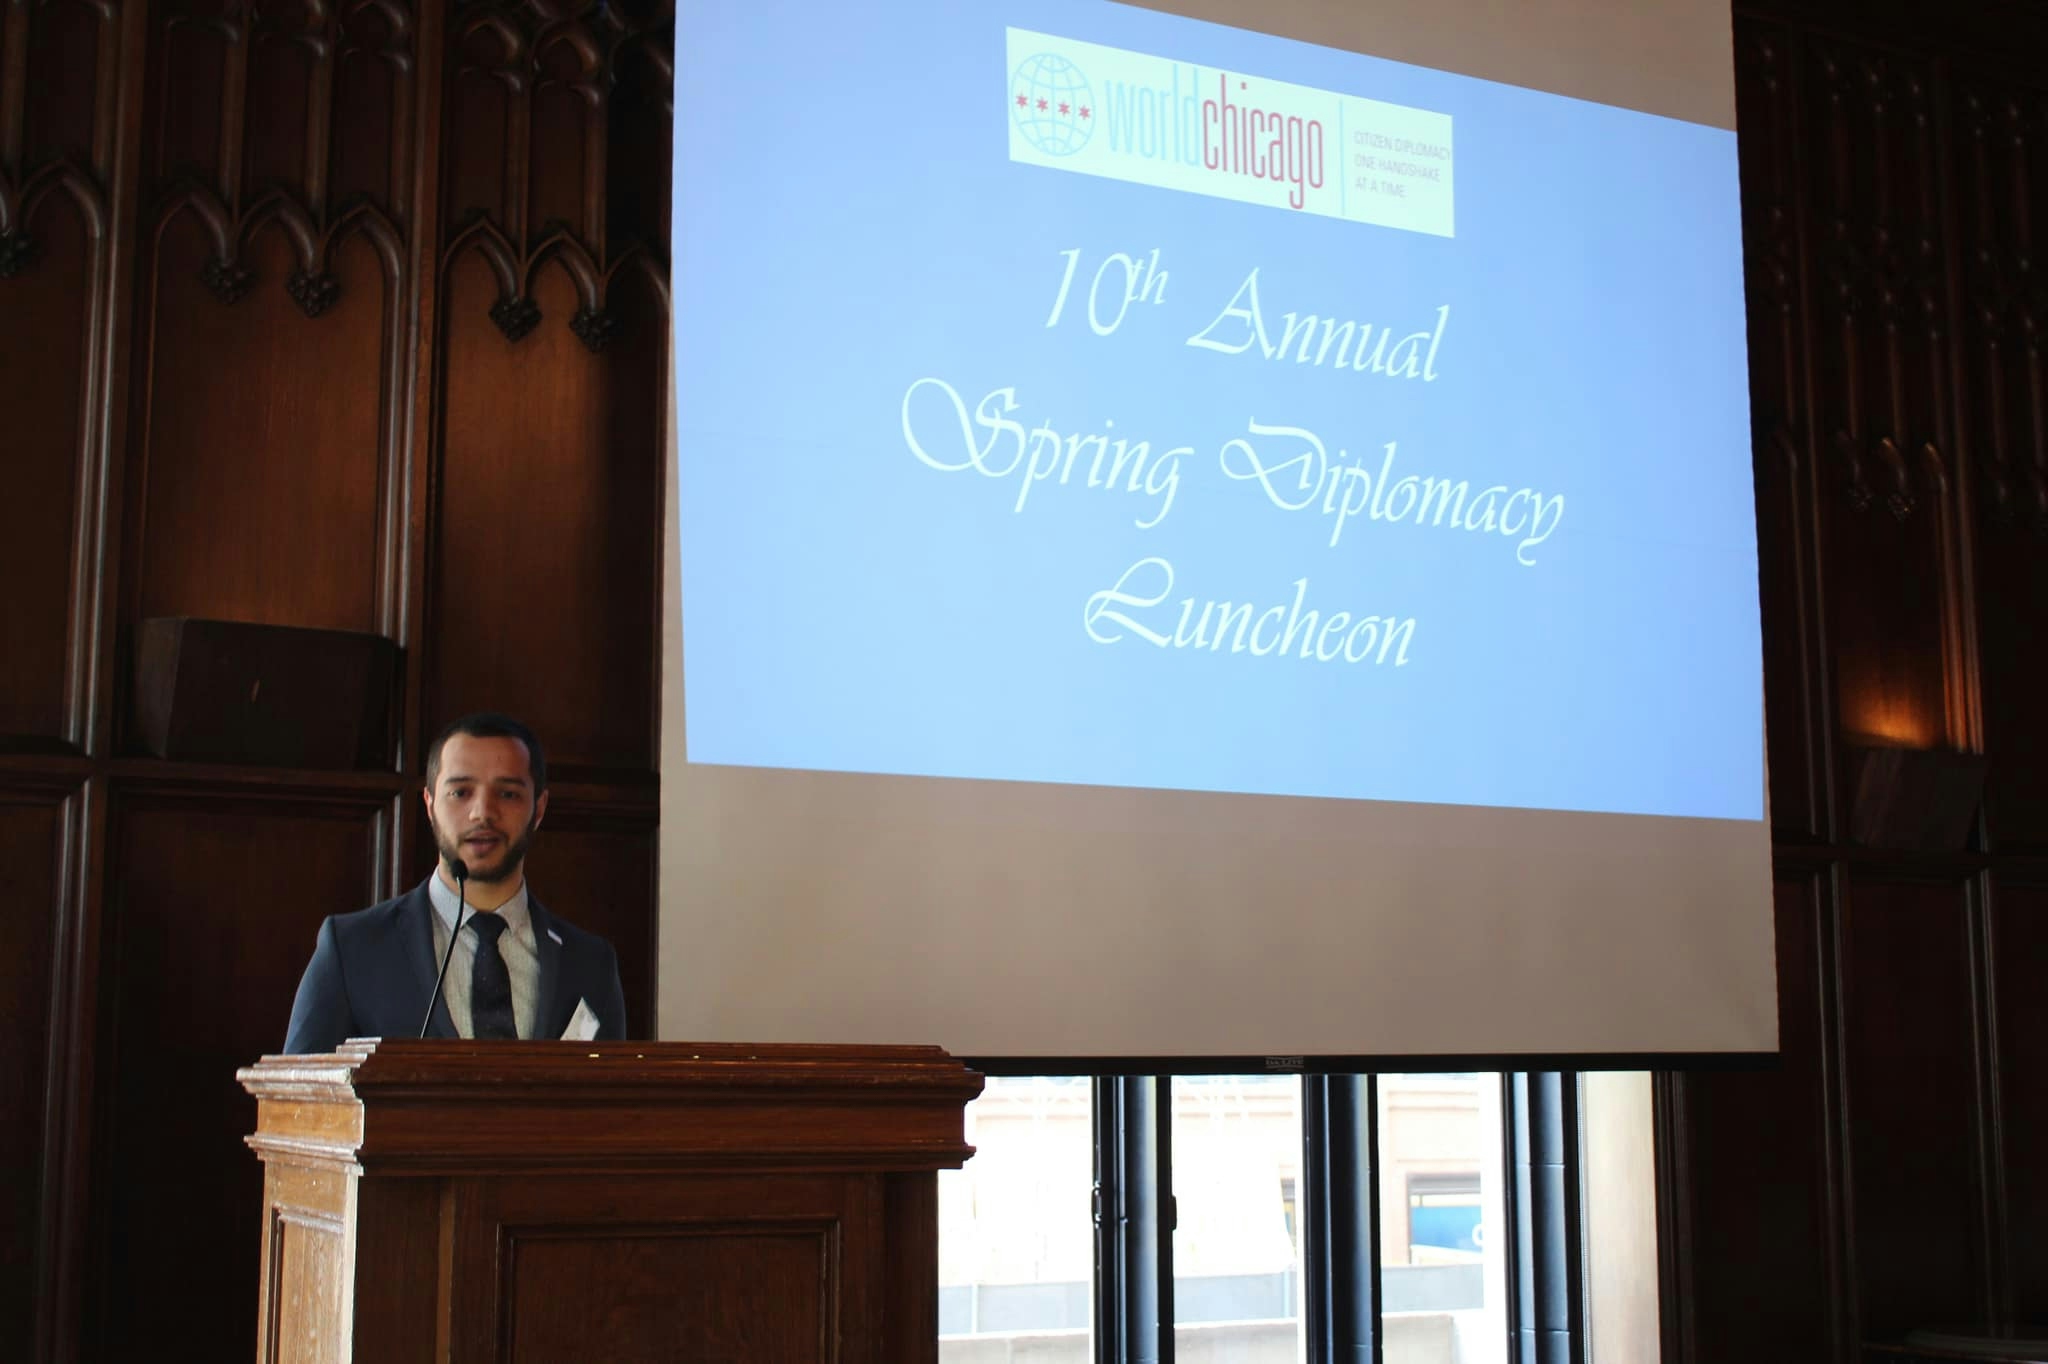 Lokman speaking at the 10th Annual Spring Diplomacy Luncheon hosted by World Chicago